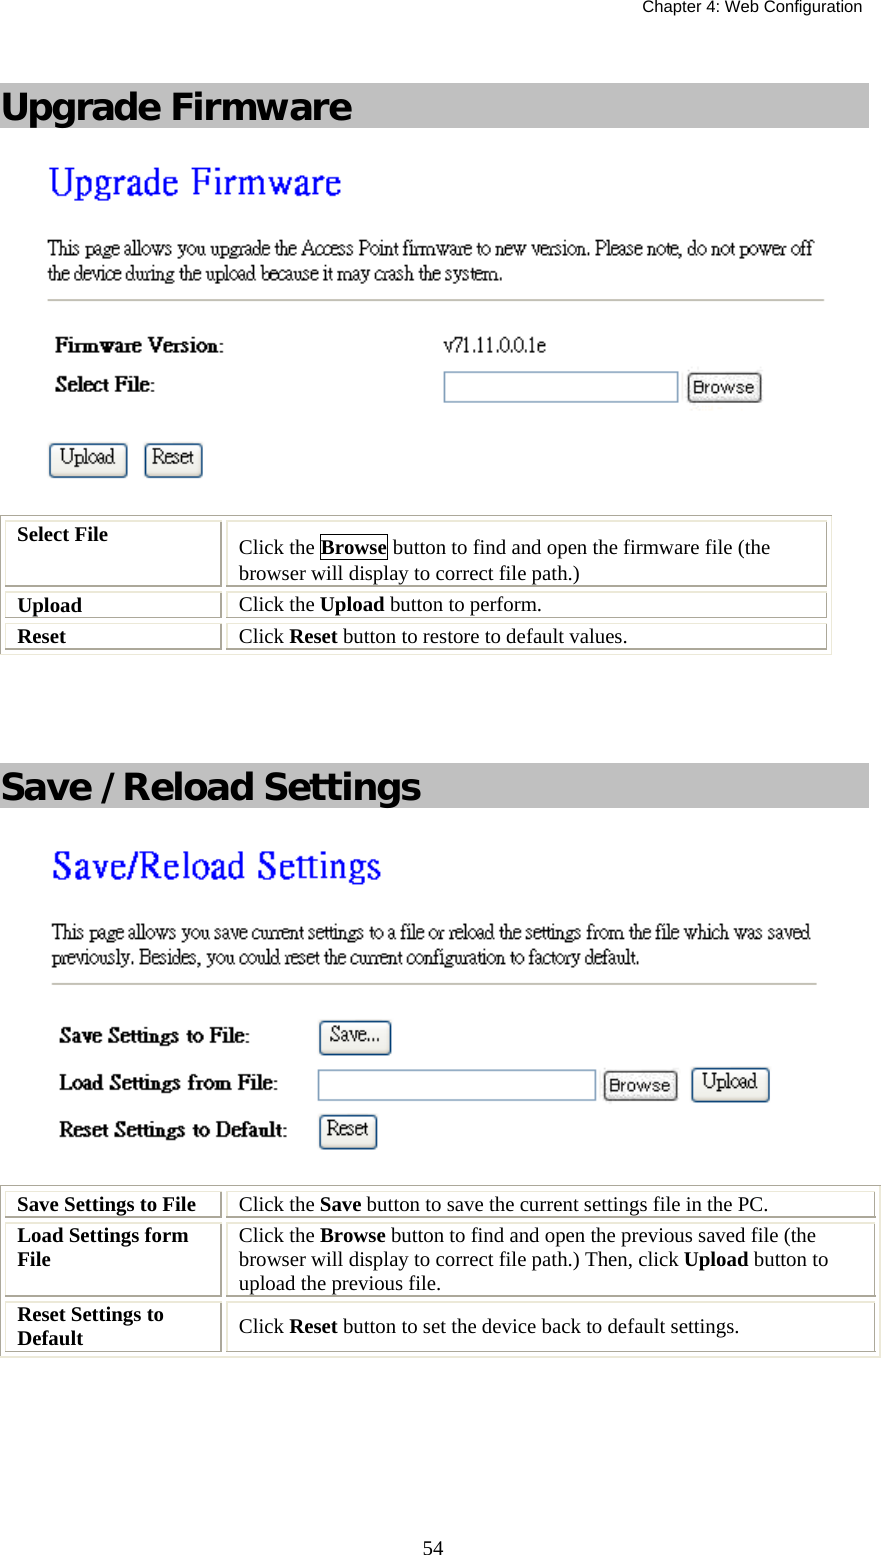   Chapter 4: Web Configuration  54 Upgrade Firmware  Select File   Click the Browse button to find and open the firmware file (the browser will display to correct file path.) Upload  Click the Upload button to perform. Reset  Click Reset button to restore to default values.   Save /Reload Settings  Save Settings to File  Click the Save button to save the current settings file in the PC.  Load Settings form File   Click the Browse button to find and open the previous saved file (the browser will display to correct file path.) Then, click Upload button to upload the previous file. Reset Settings to Default  Click Reset button to set the device back to default settings.       